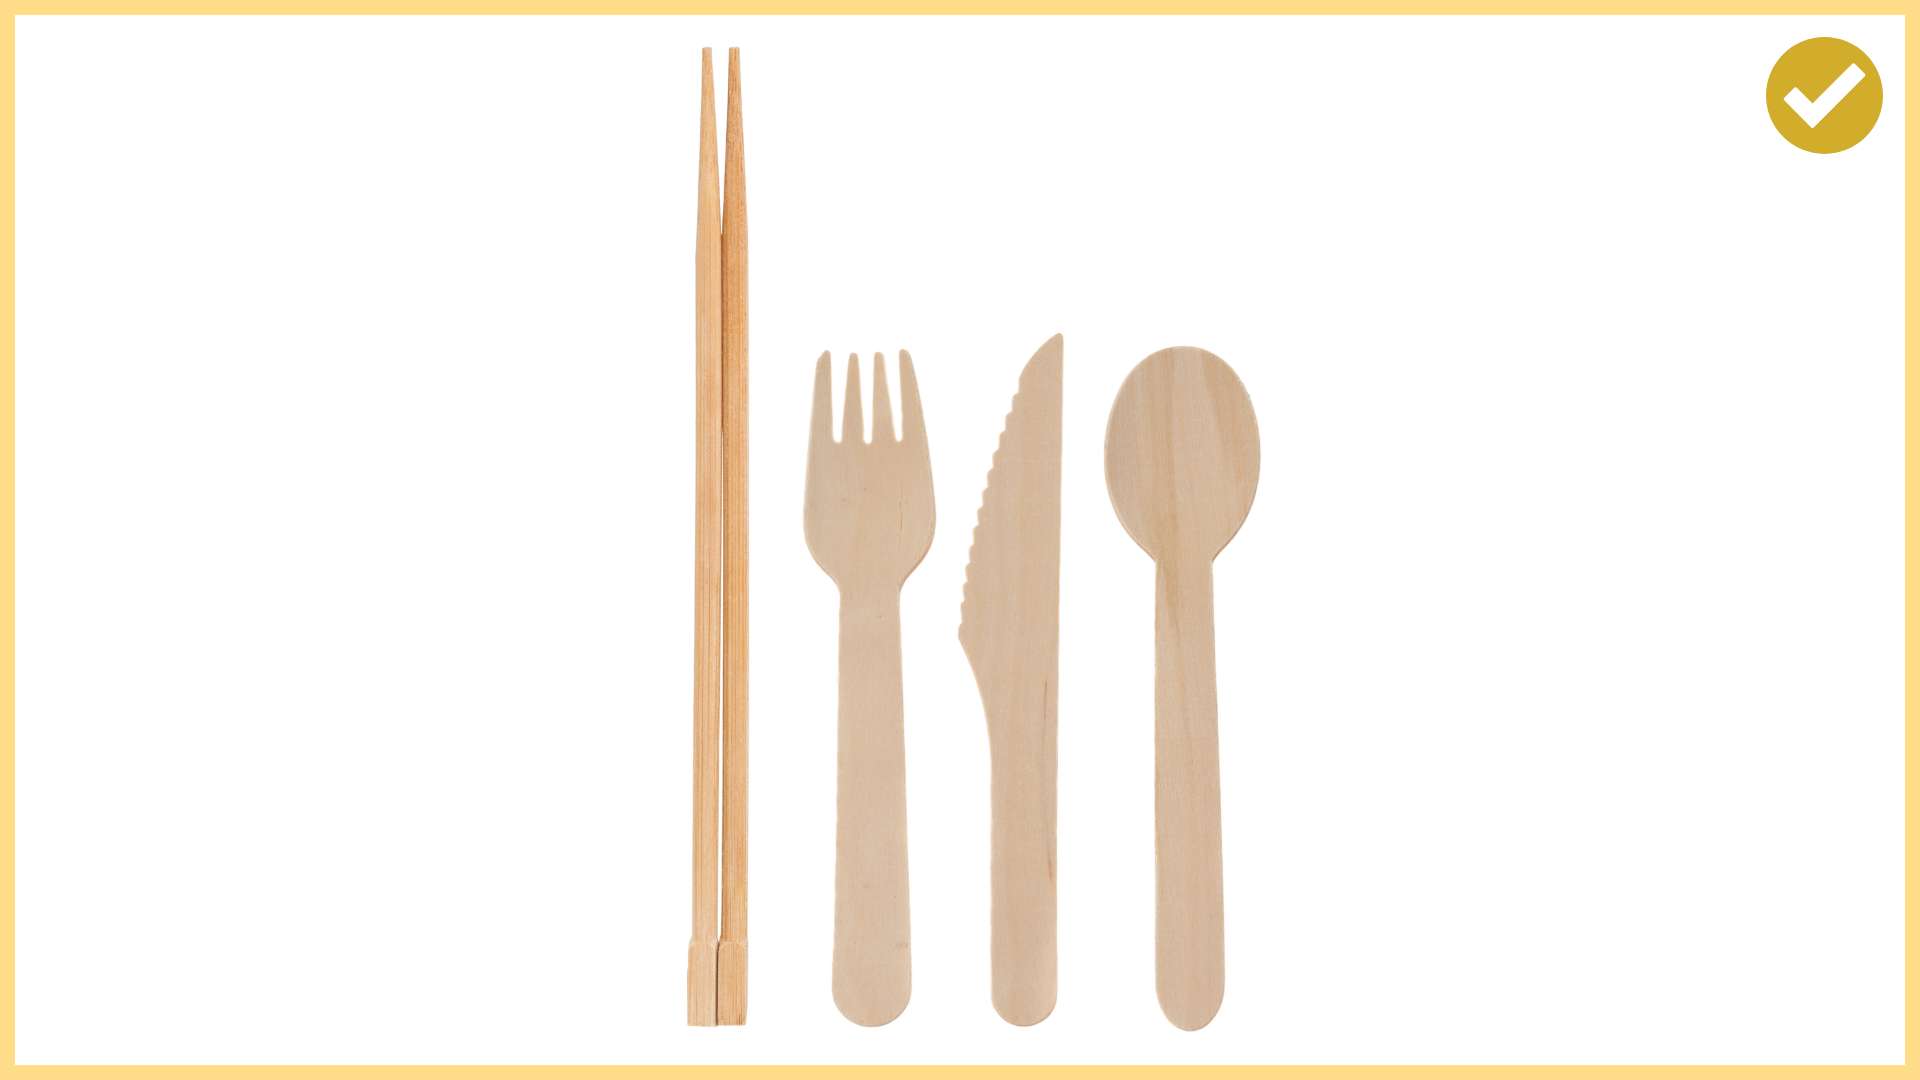 Wooden chopsticks, fork, knife and spoon